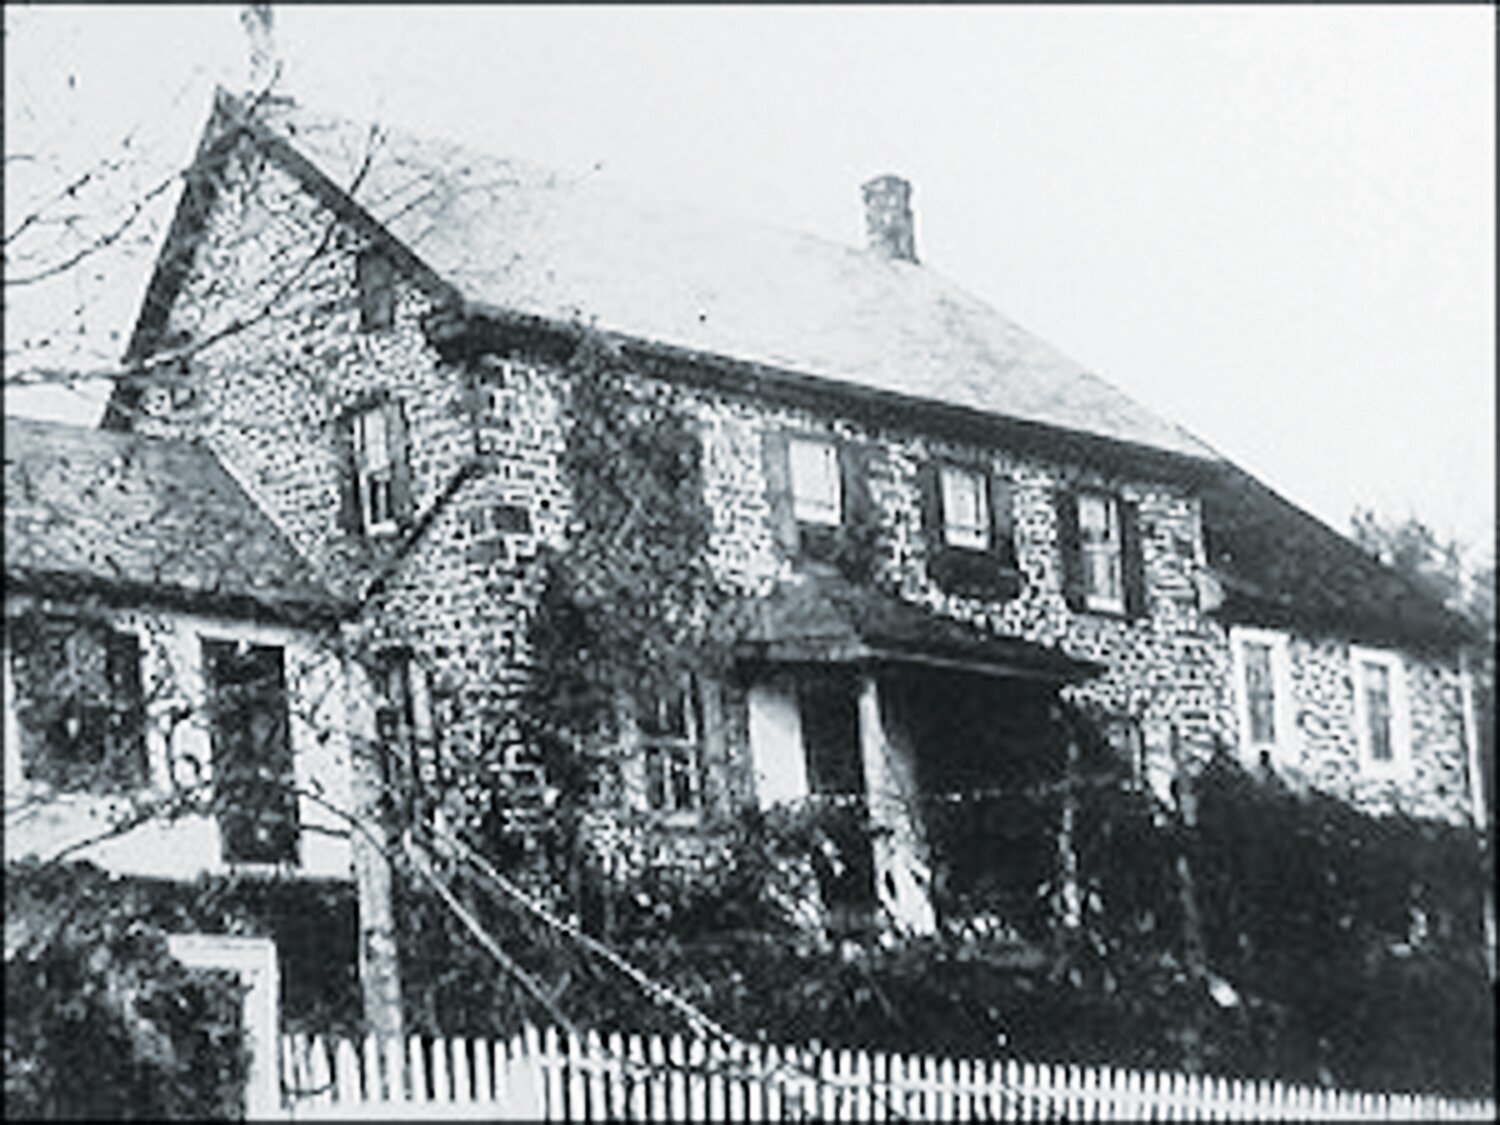 Dorothy Parker, though generally associated with Manhattan, lived part-time in Bucks County for about 20 years, in this 14-room farmhouse that still stands today and serves
as a private residence.